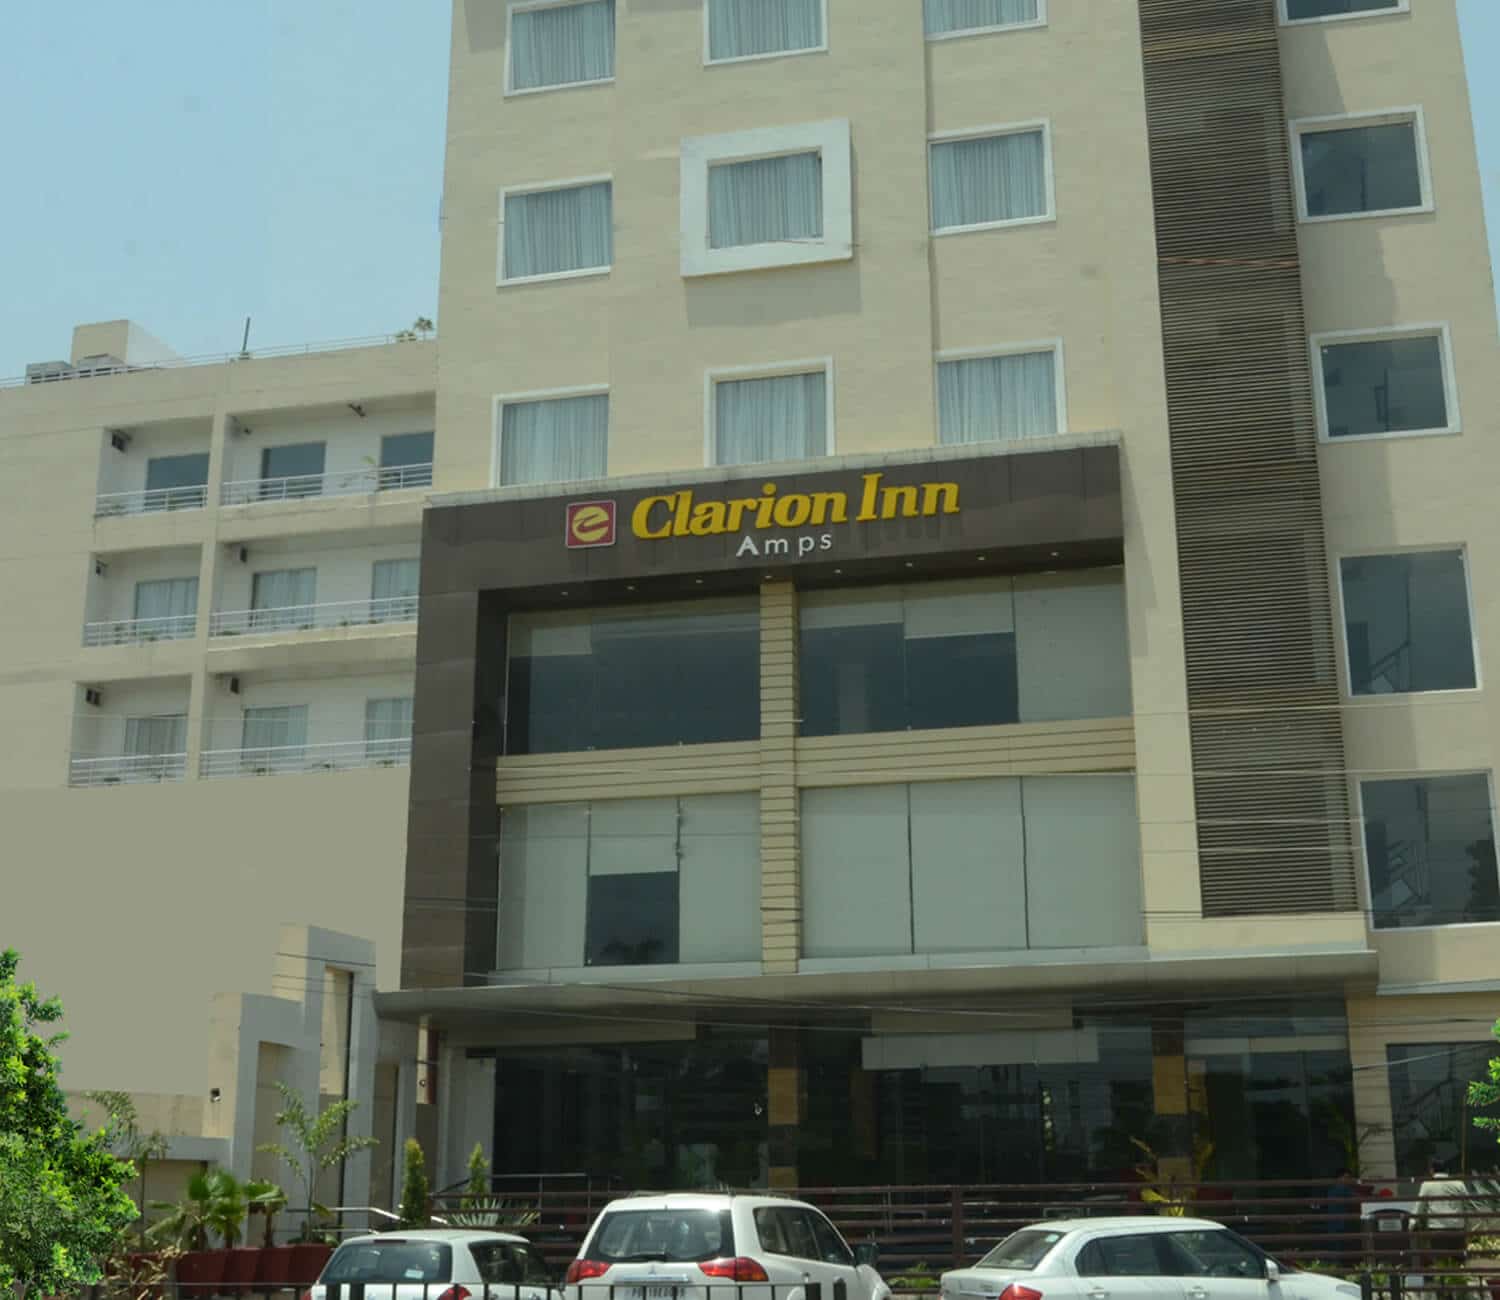 Occasion Inn Hotels- India within Pocket-Friendly Budget